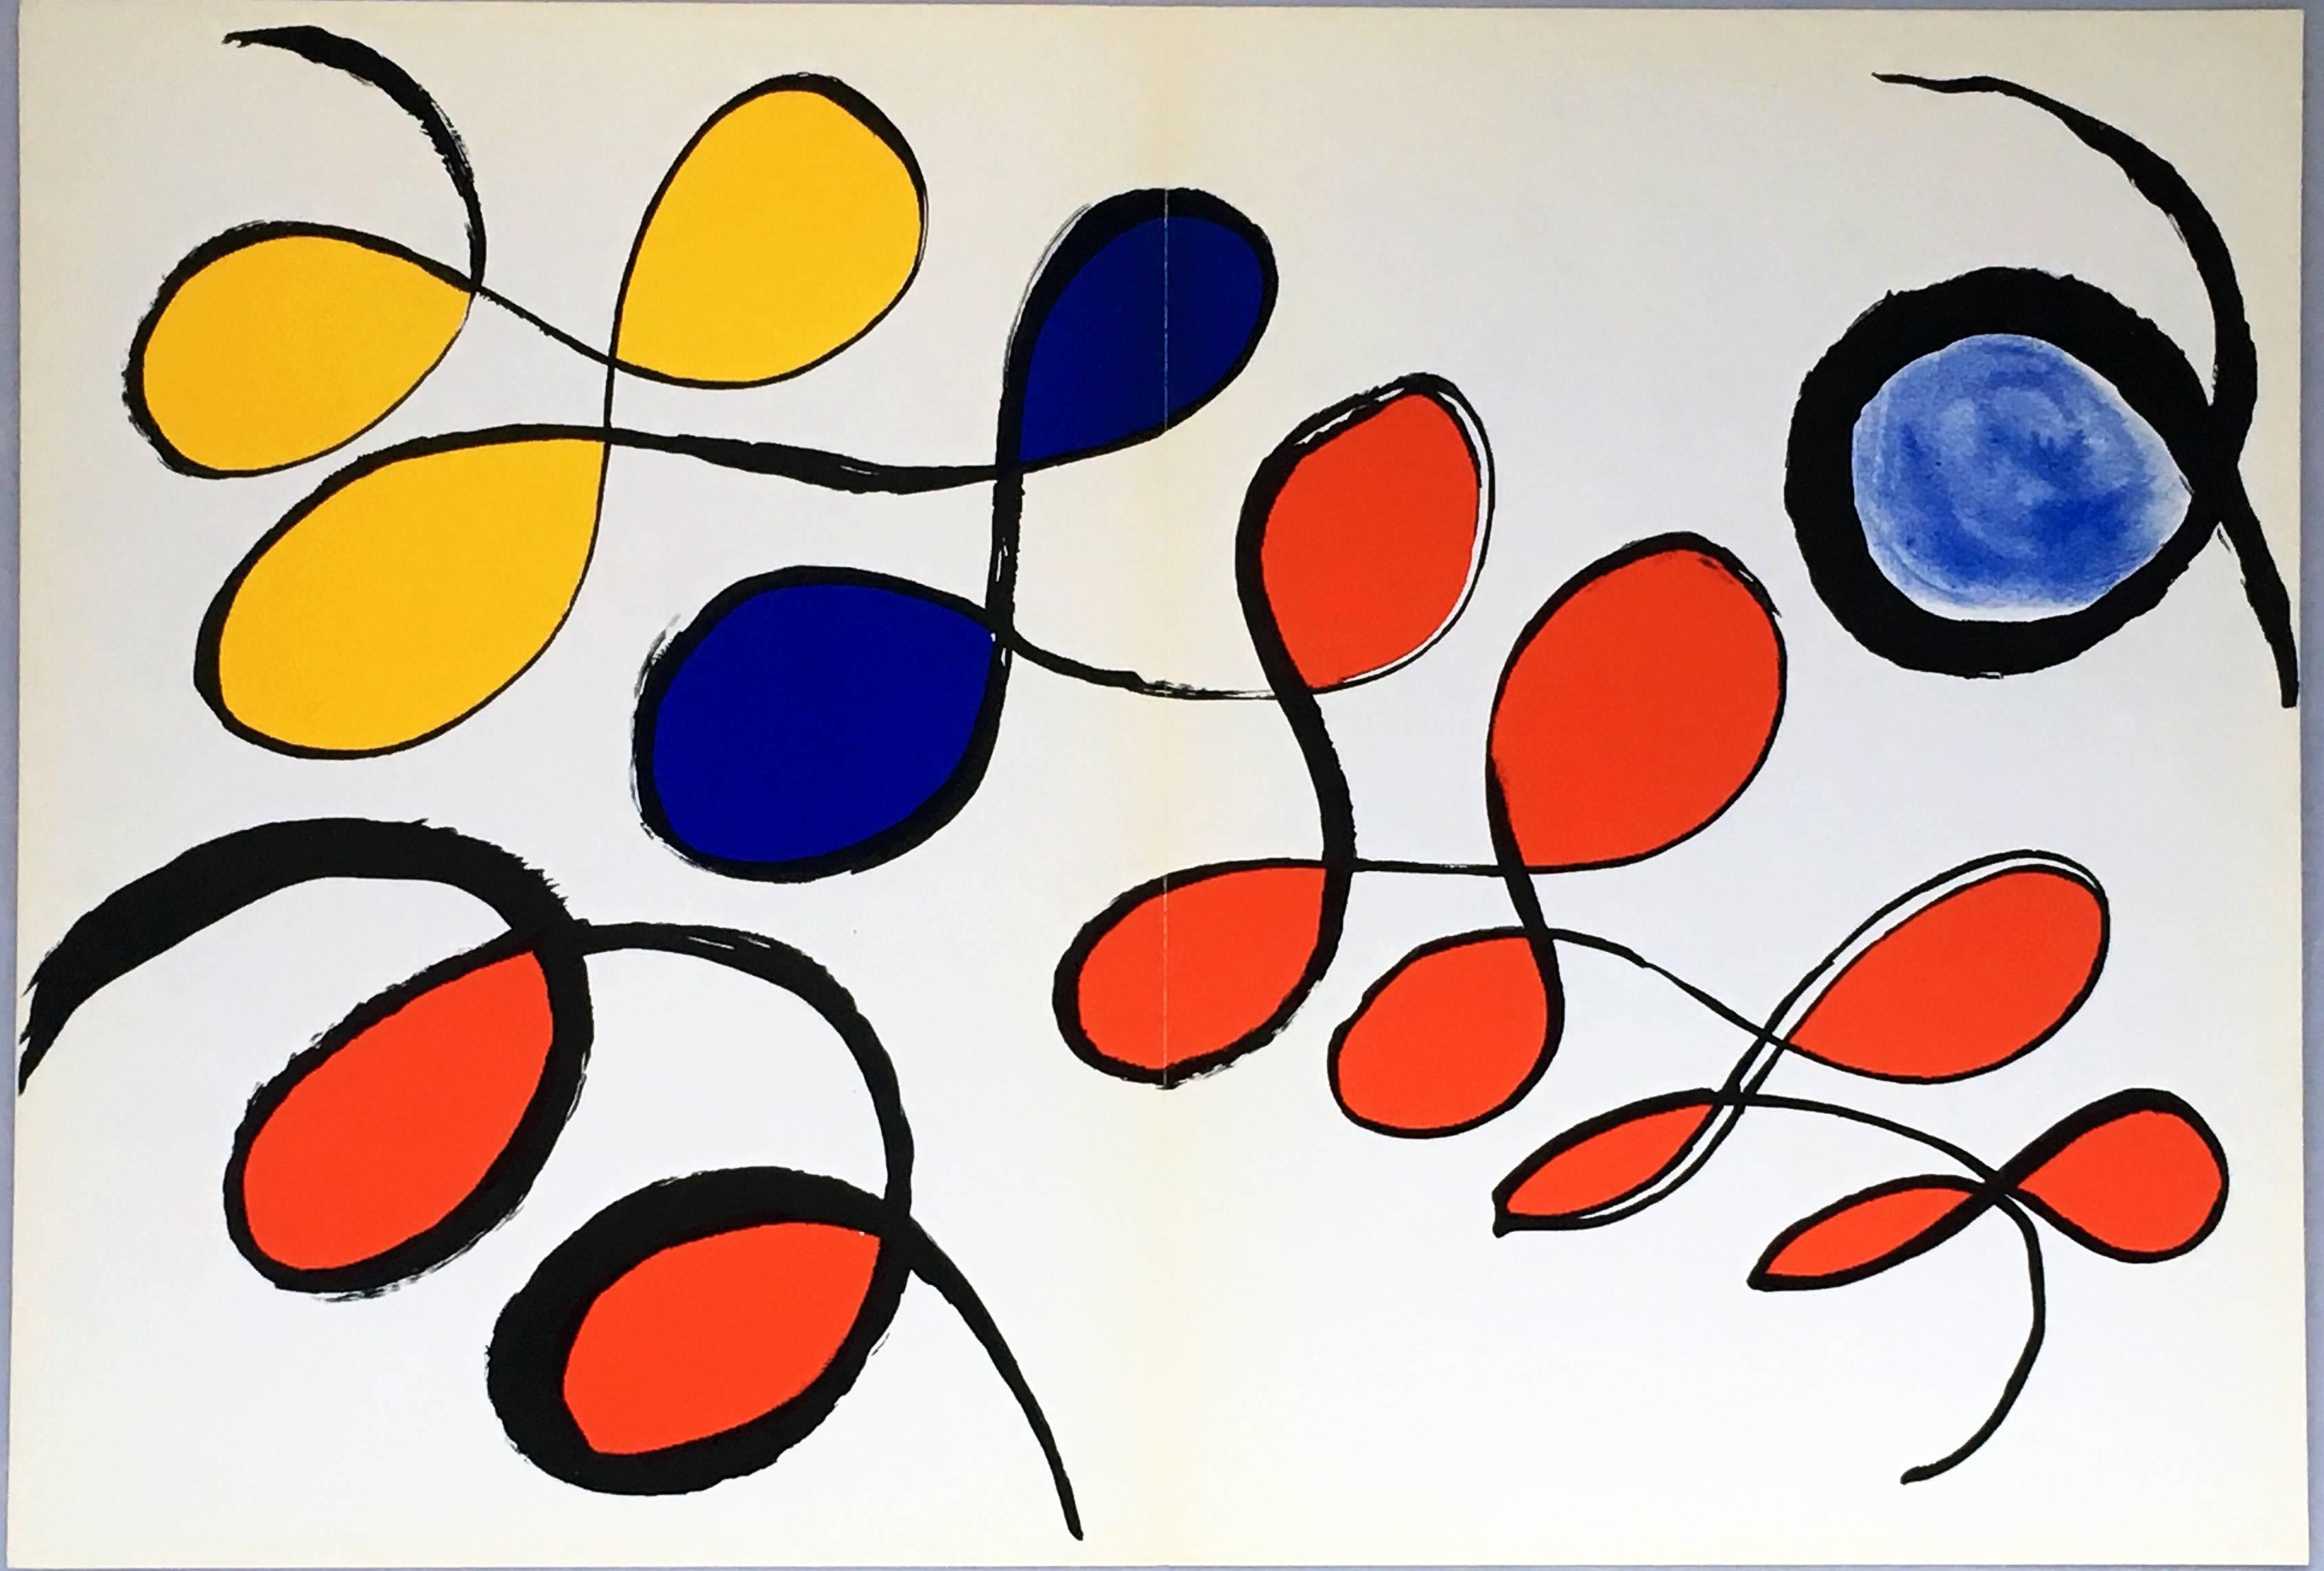 Vintage Alexander Calder Lithograph 1973 
Portfolio: Derriere Le Miroir
Published by: Galerie Maeght, Paris 1973. 

Lithograph in colors 
11 x 15 inches
Center fold-line as issued; otherwise very good condition for its age


Related